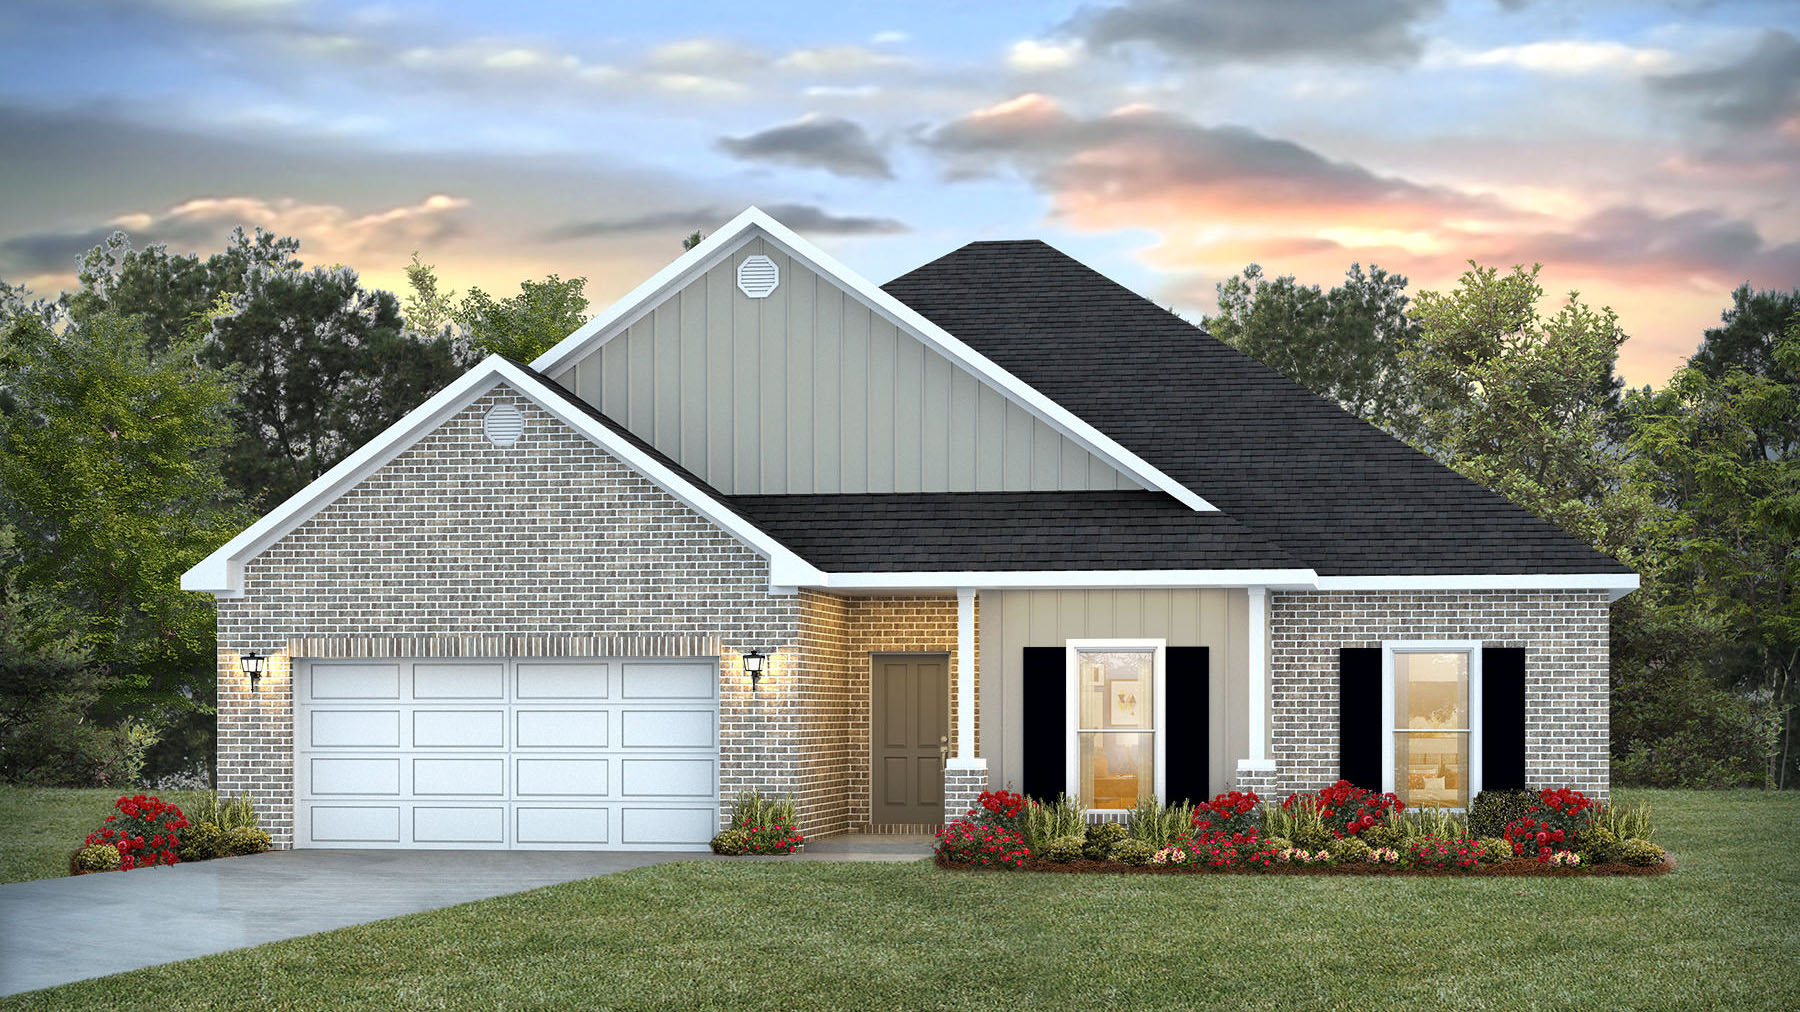 Holly Elevation D11 Single Story Front Entry Garage